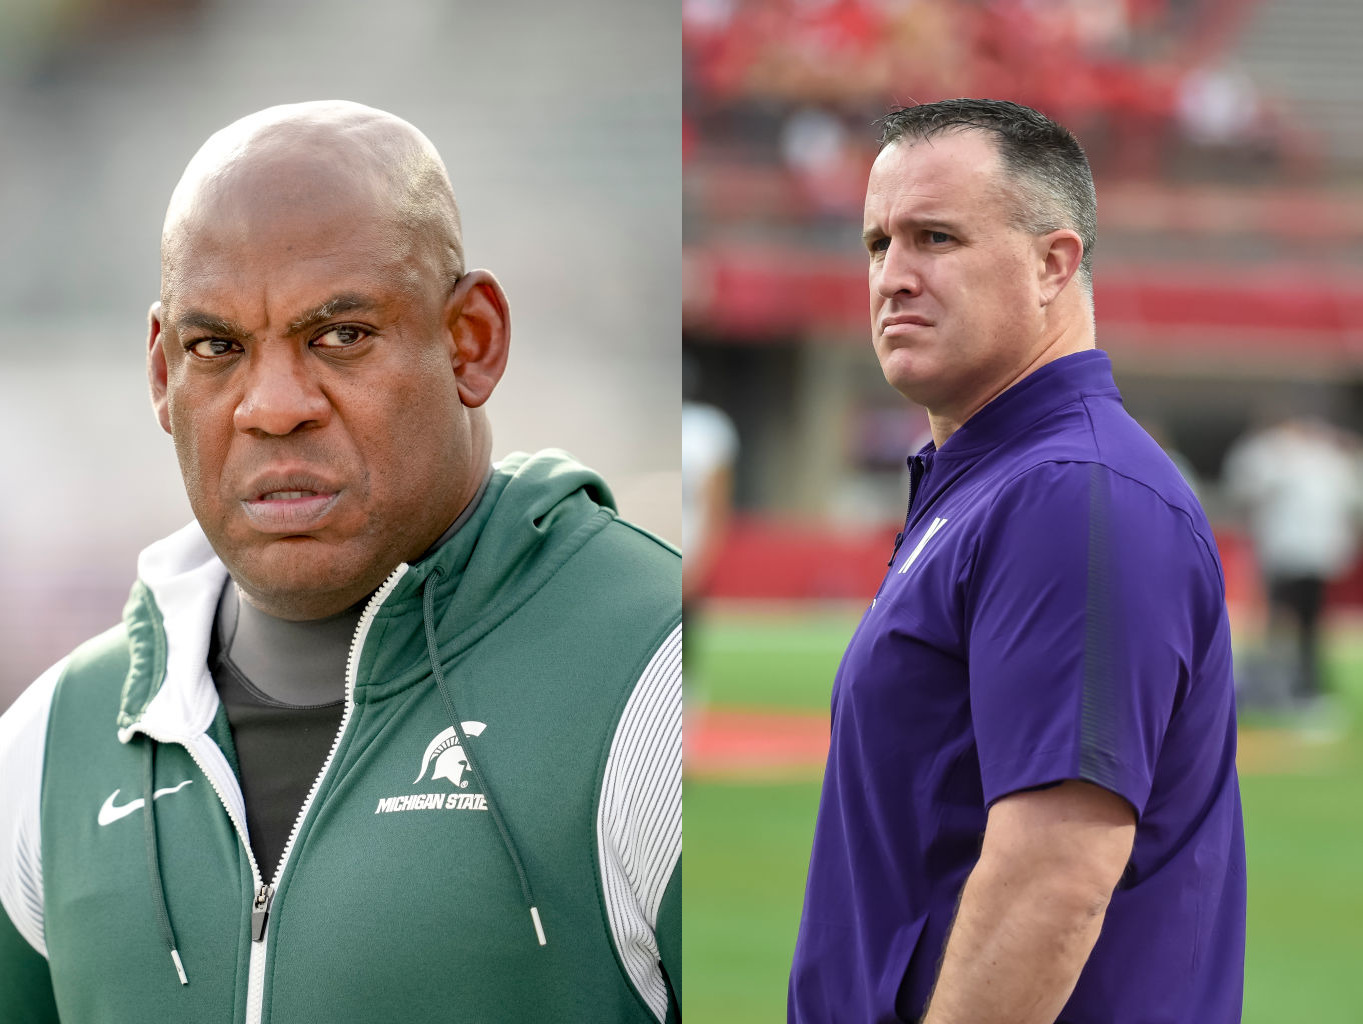 A photo of former Michigan State coach Mel Tucker on the left and former Northwestern football coach Pat Fitzgerald on the right.